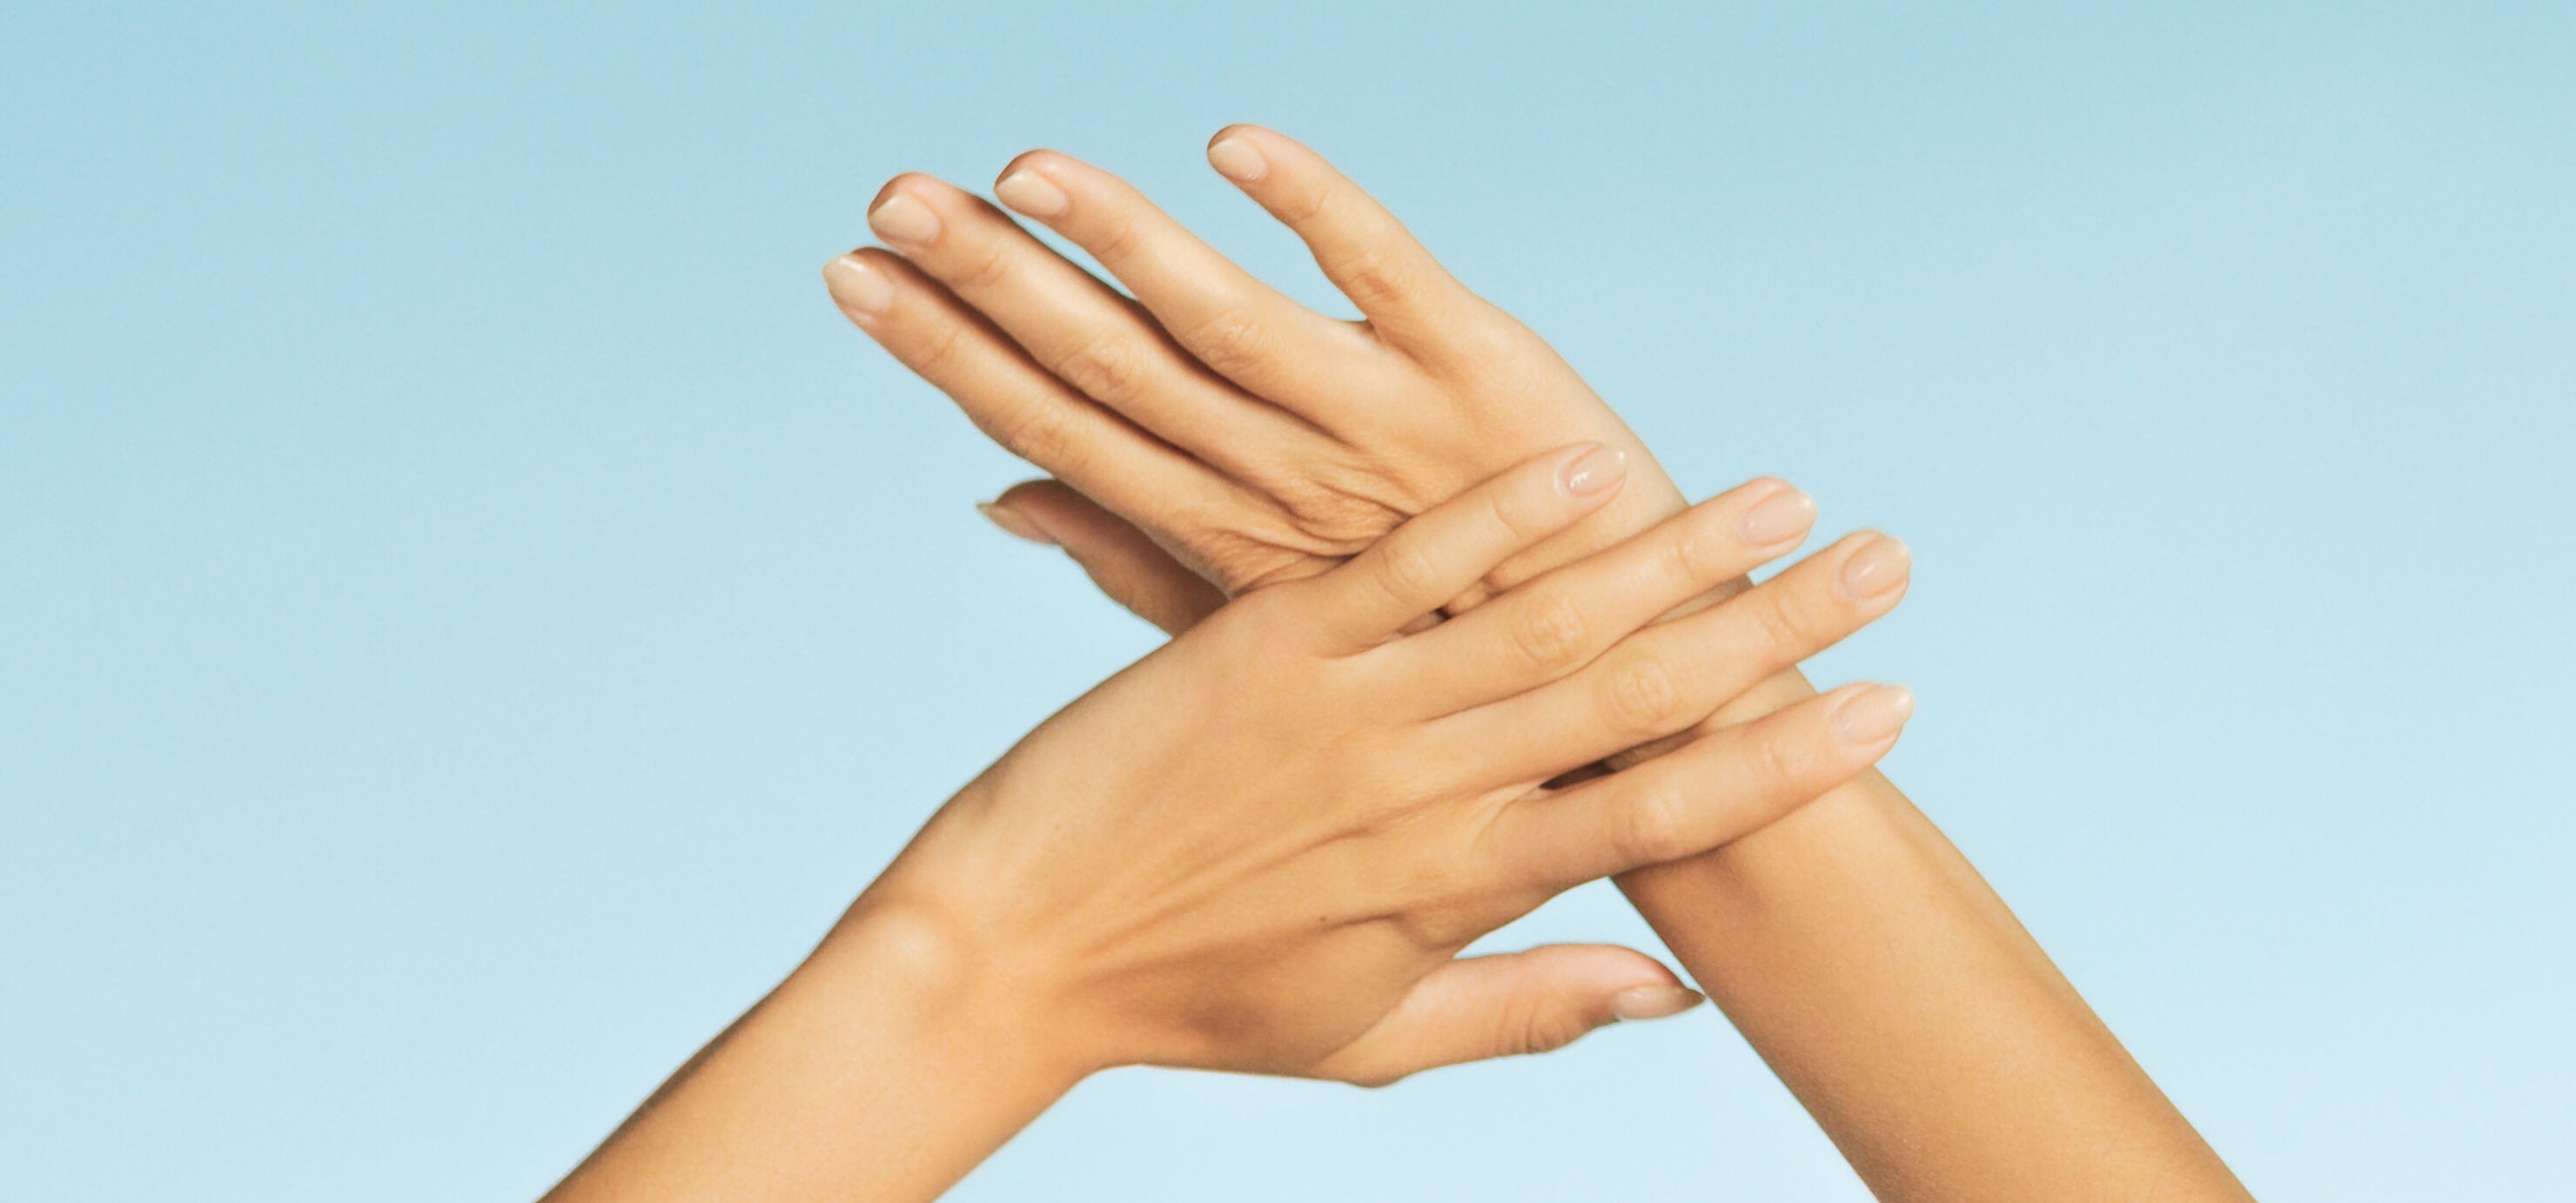 Image of Hands with Healthy Nails